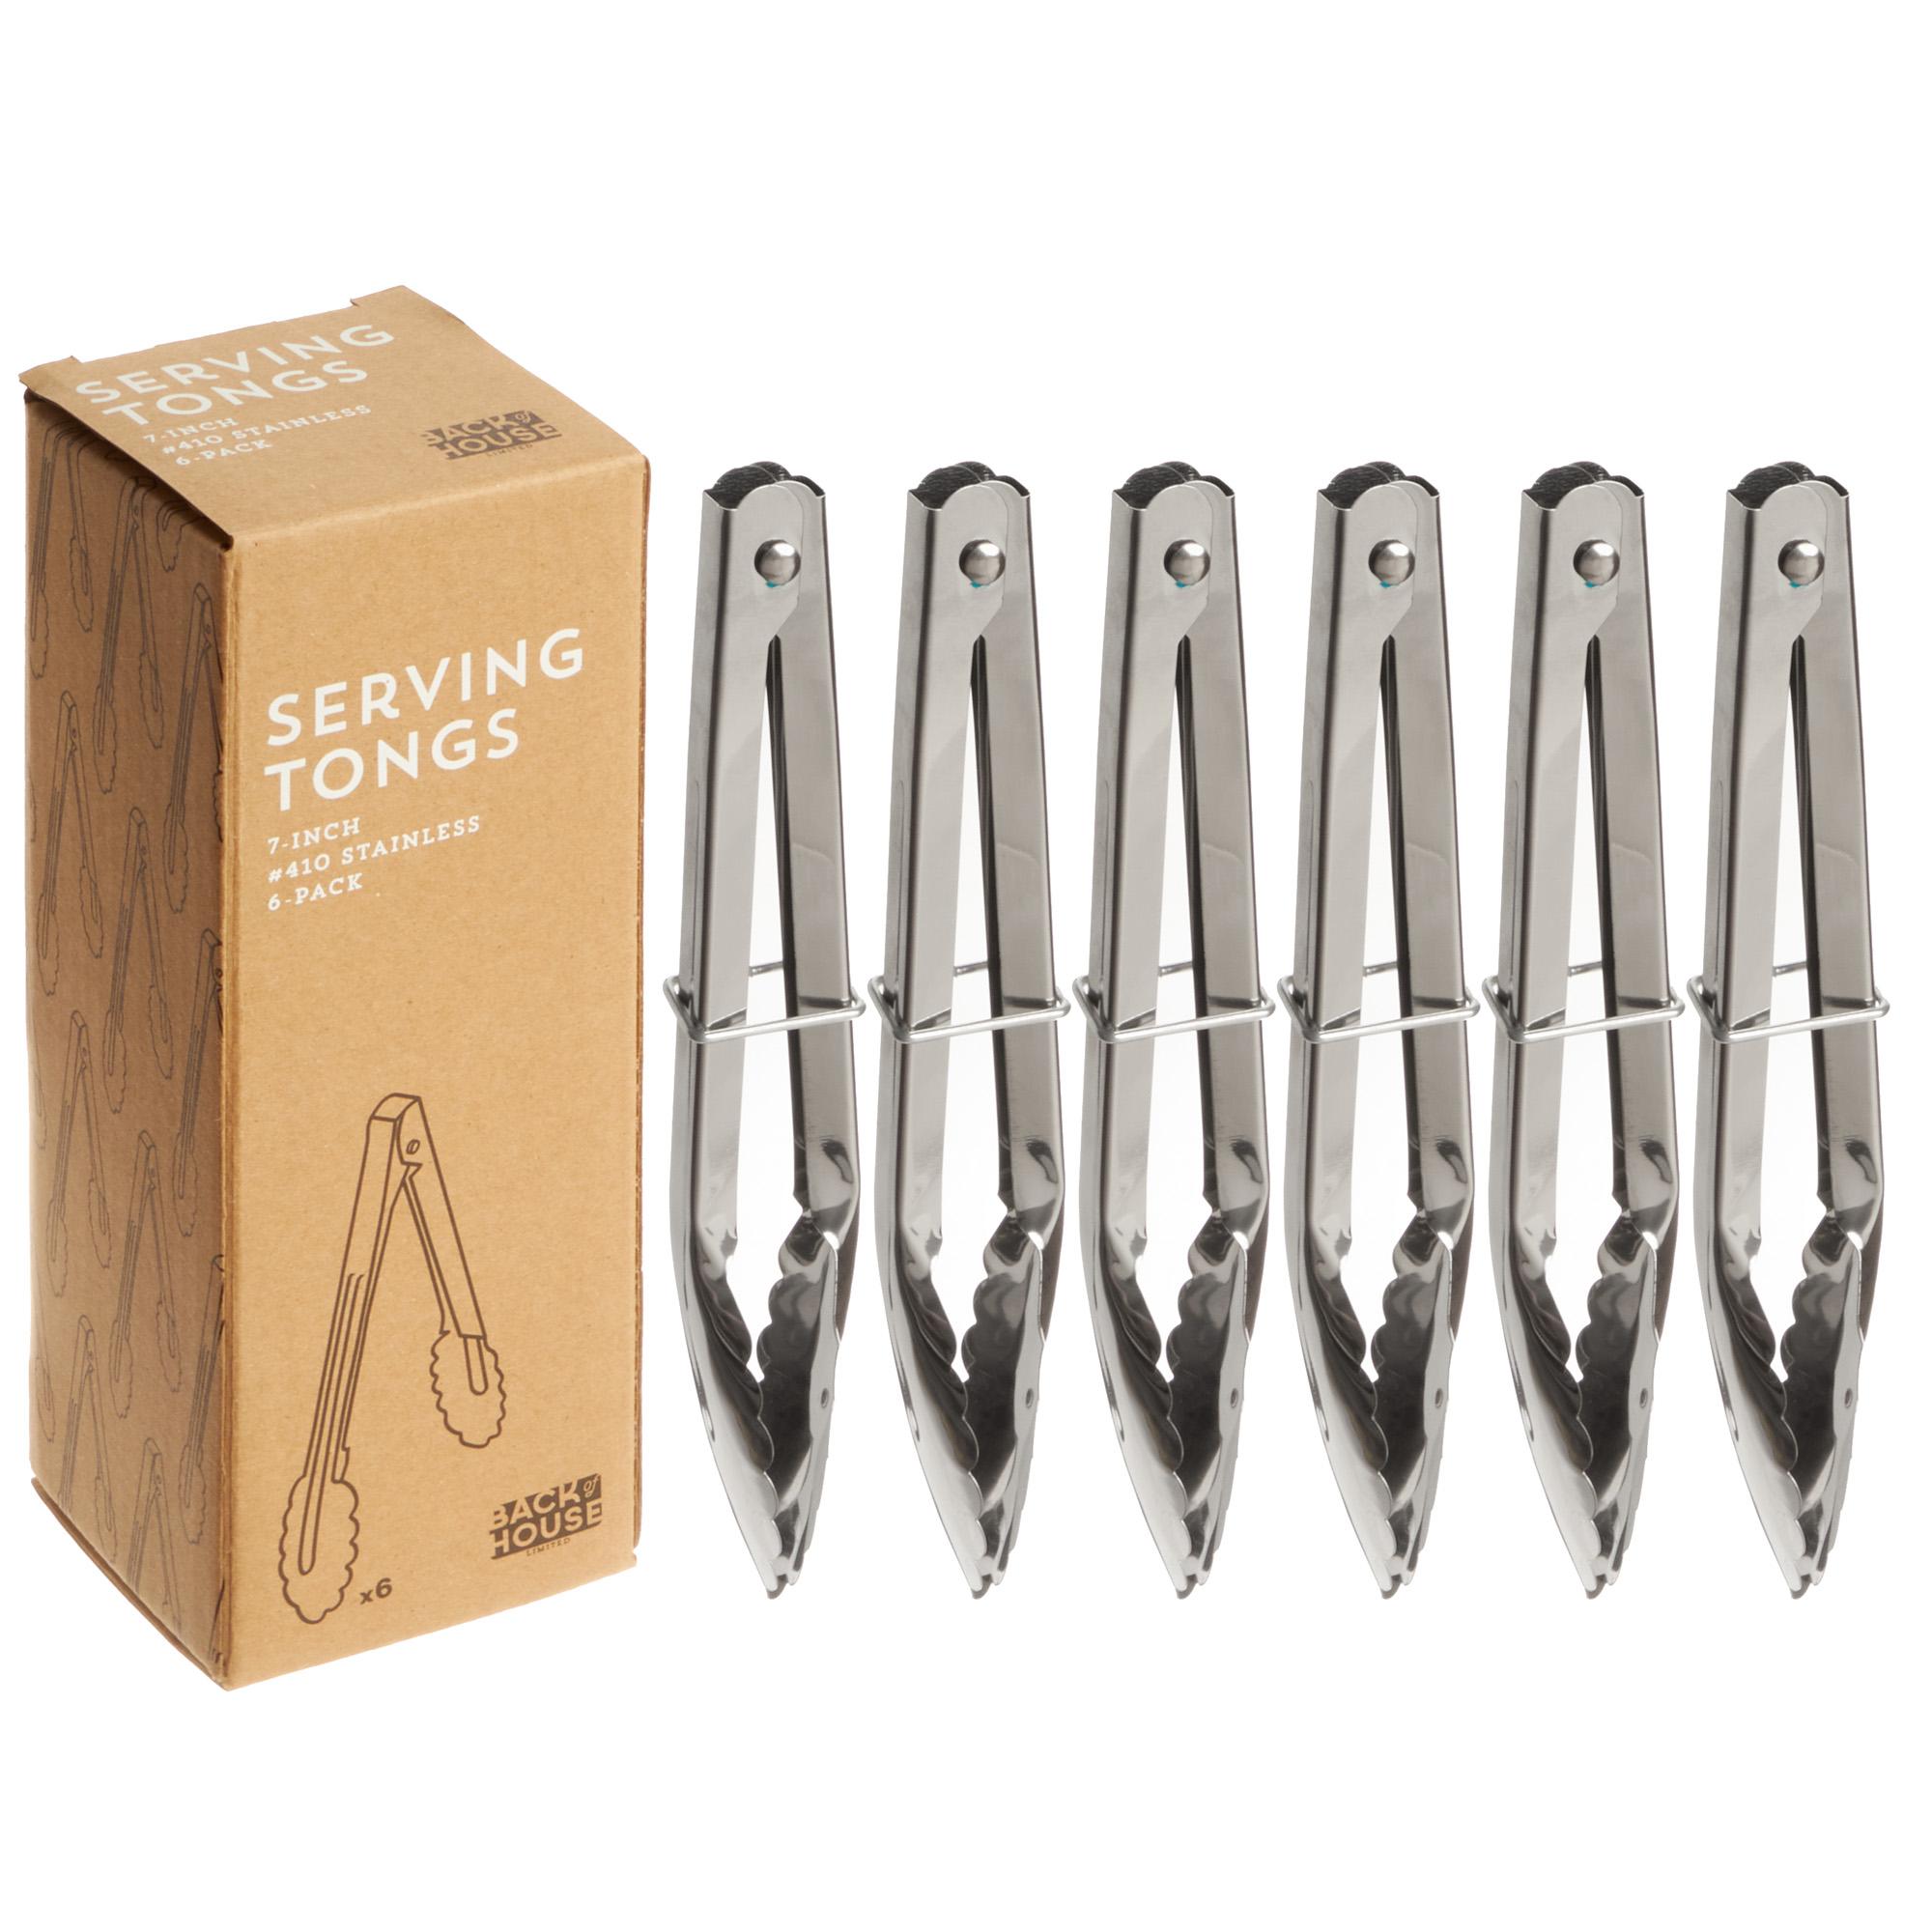 6-pack Stainless Steel Serving Tongs, 7"